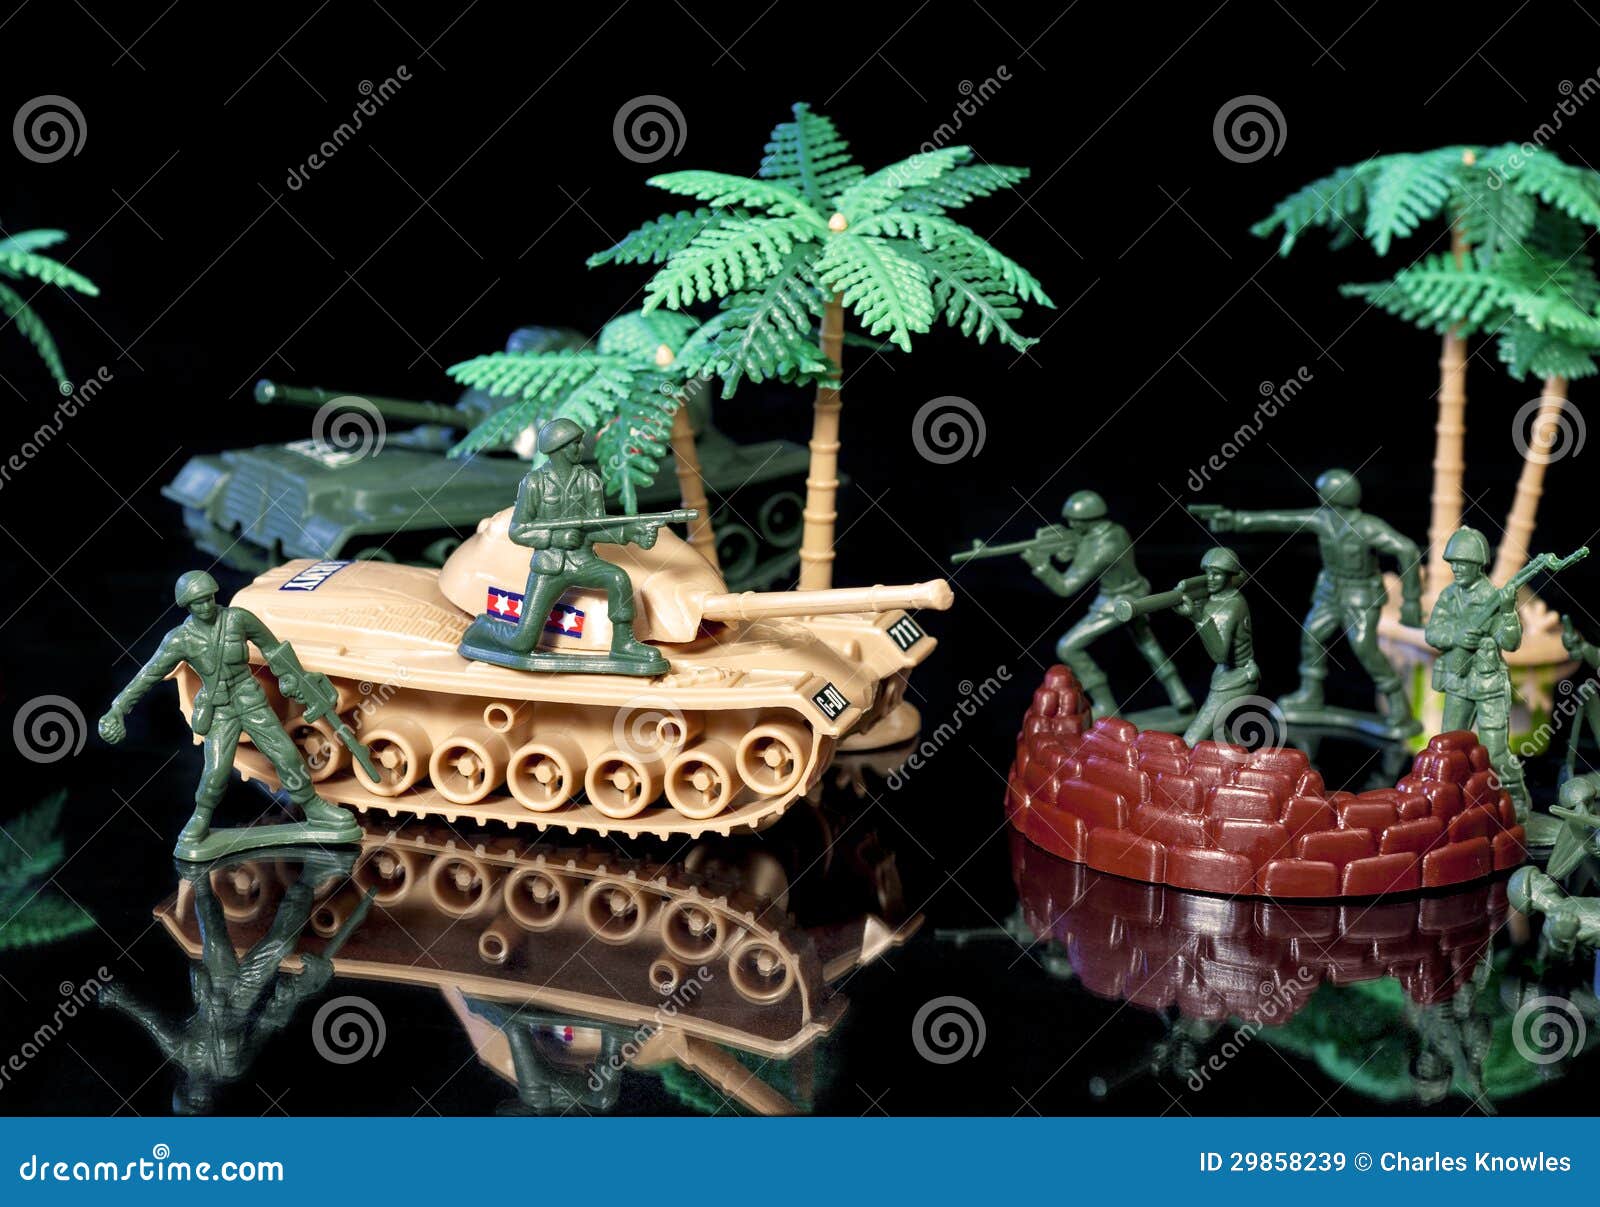 toy army men set up for defence stock image - image: 29858239